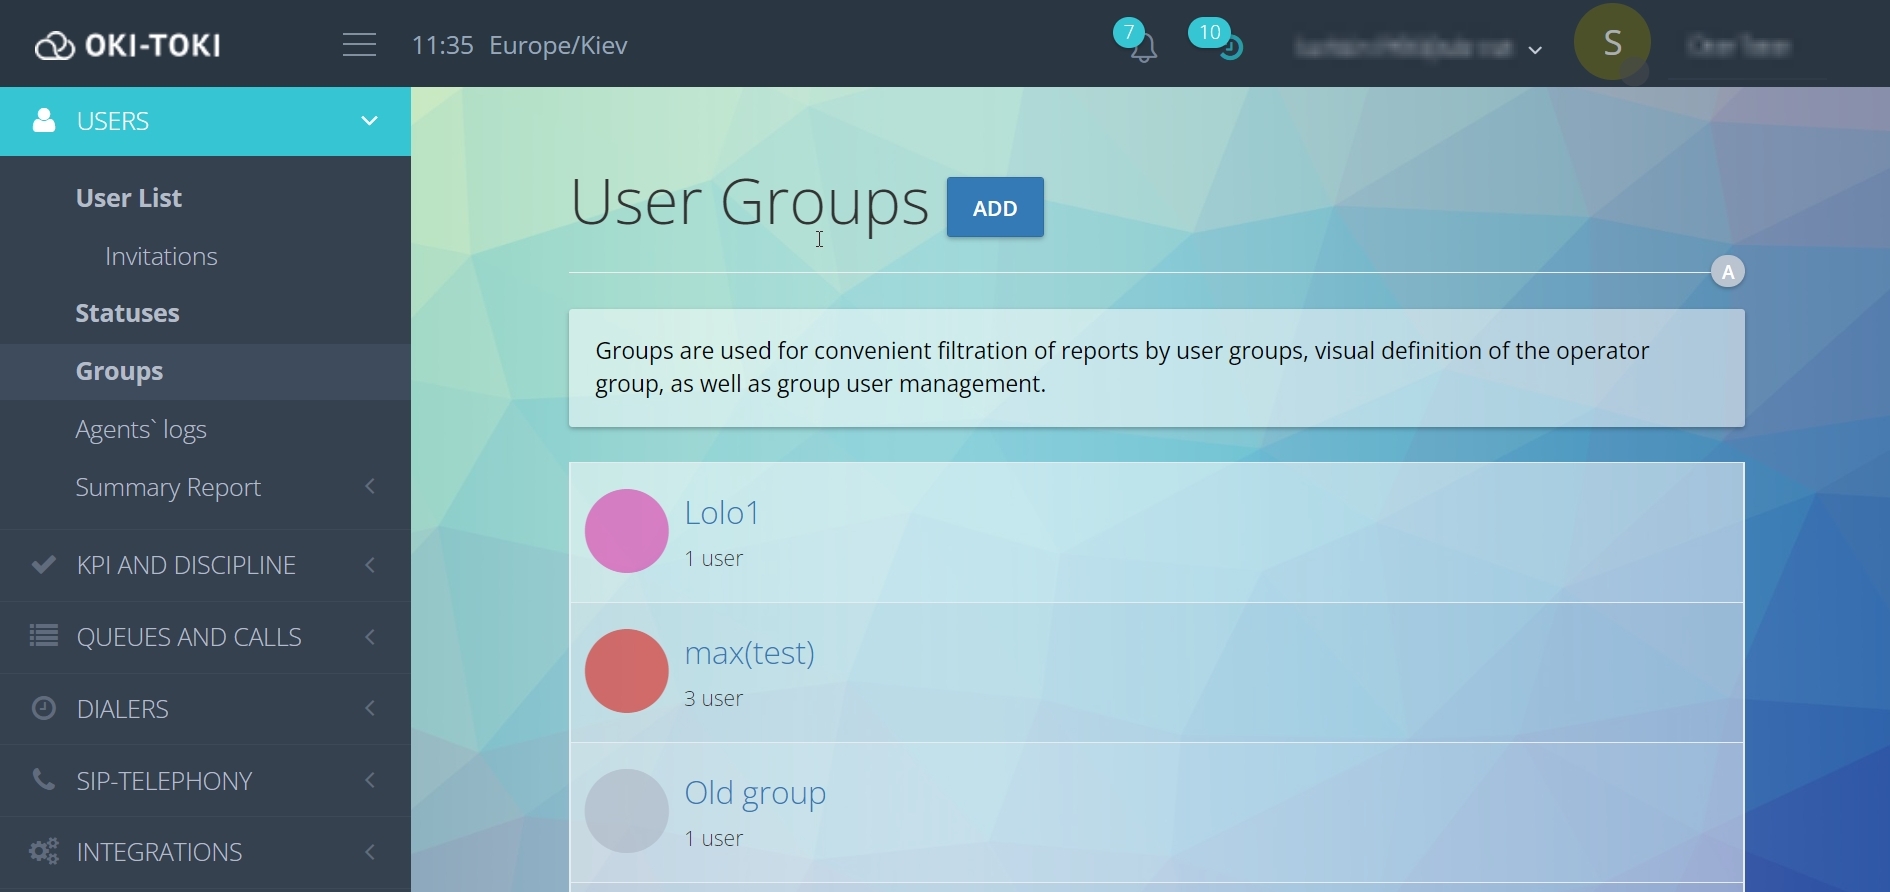 Note: User groups